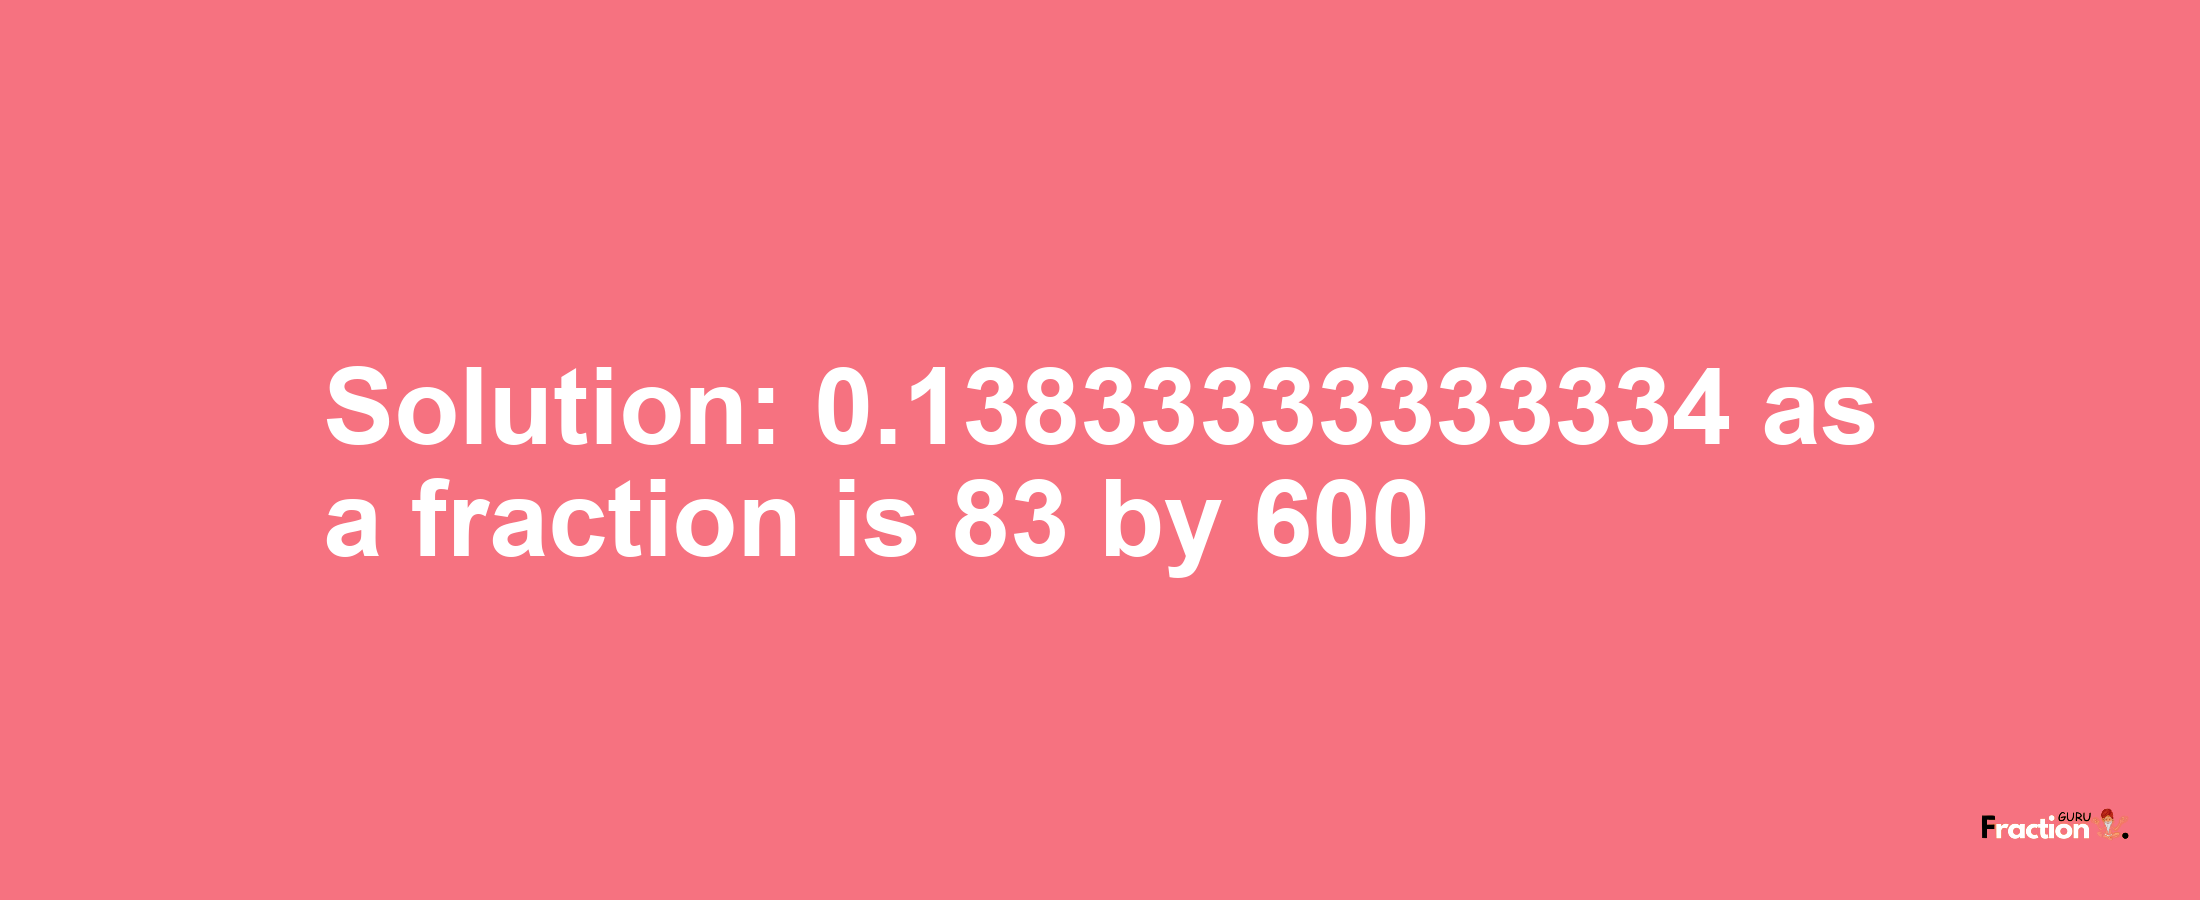 Solution:0.13833333333334 as a fraction is 83/600